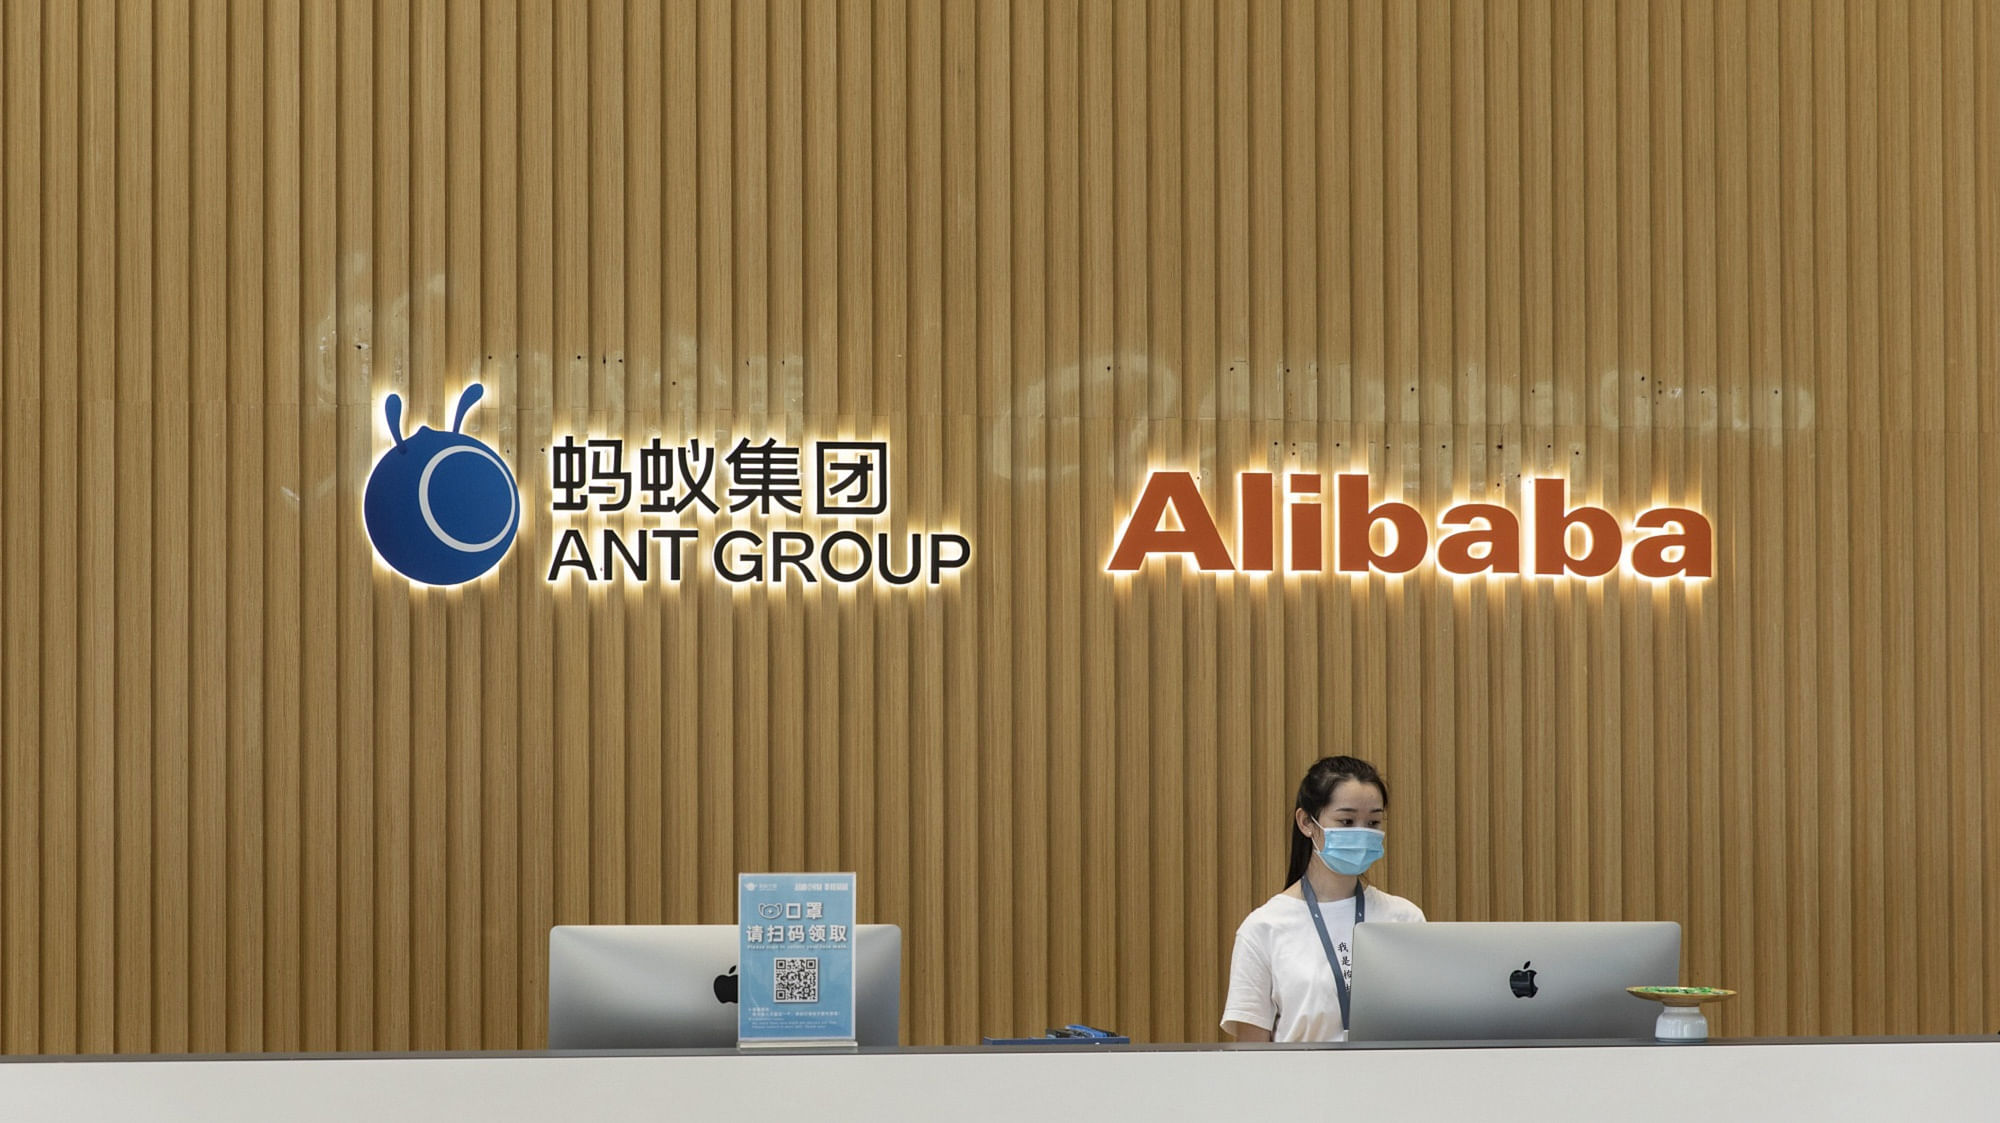 China Tells Jack Ma S Ant Group To Return To Its Roots As Provider Of Payments Services